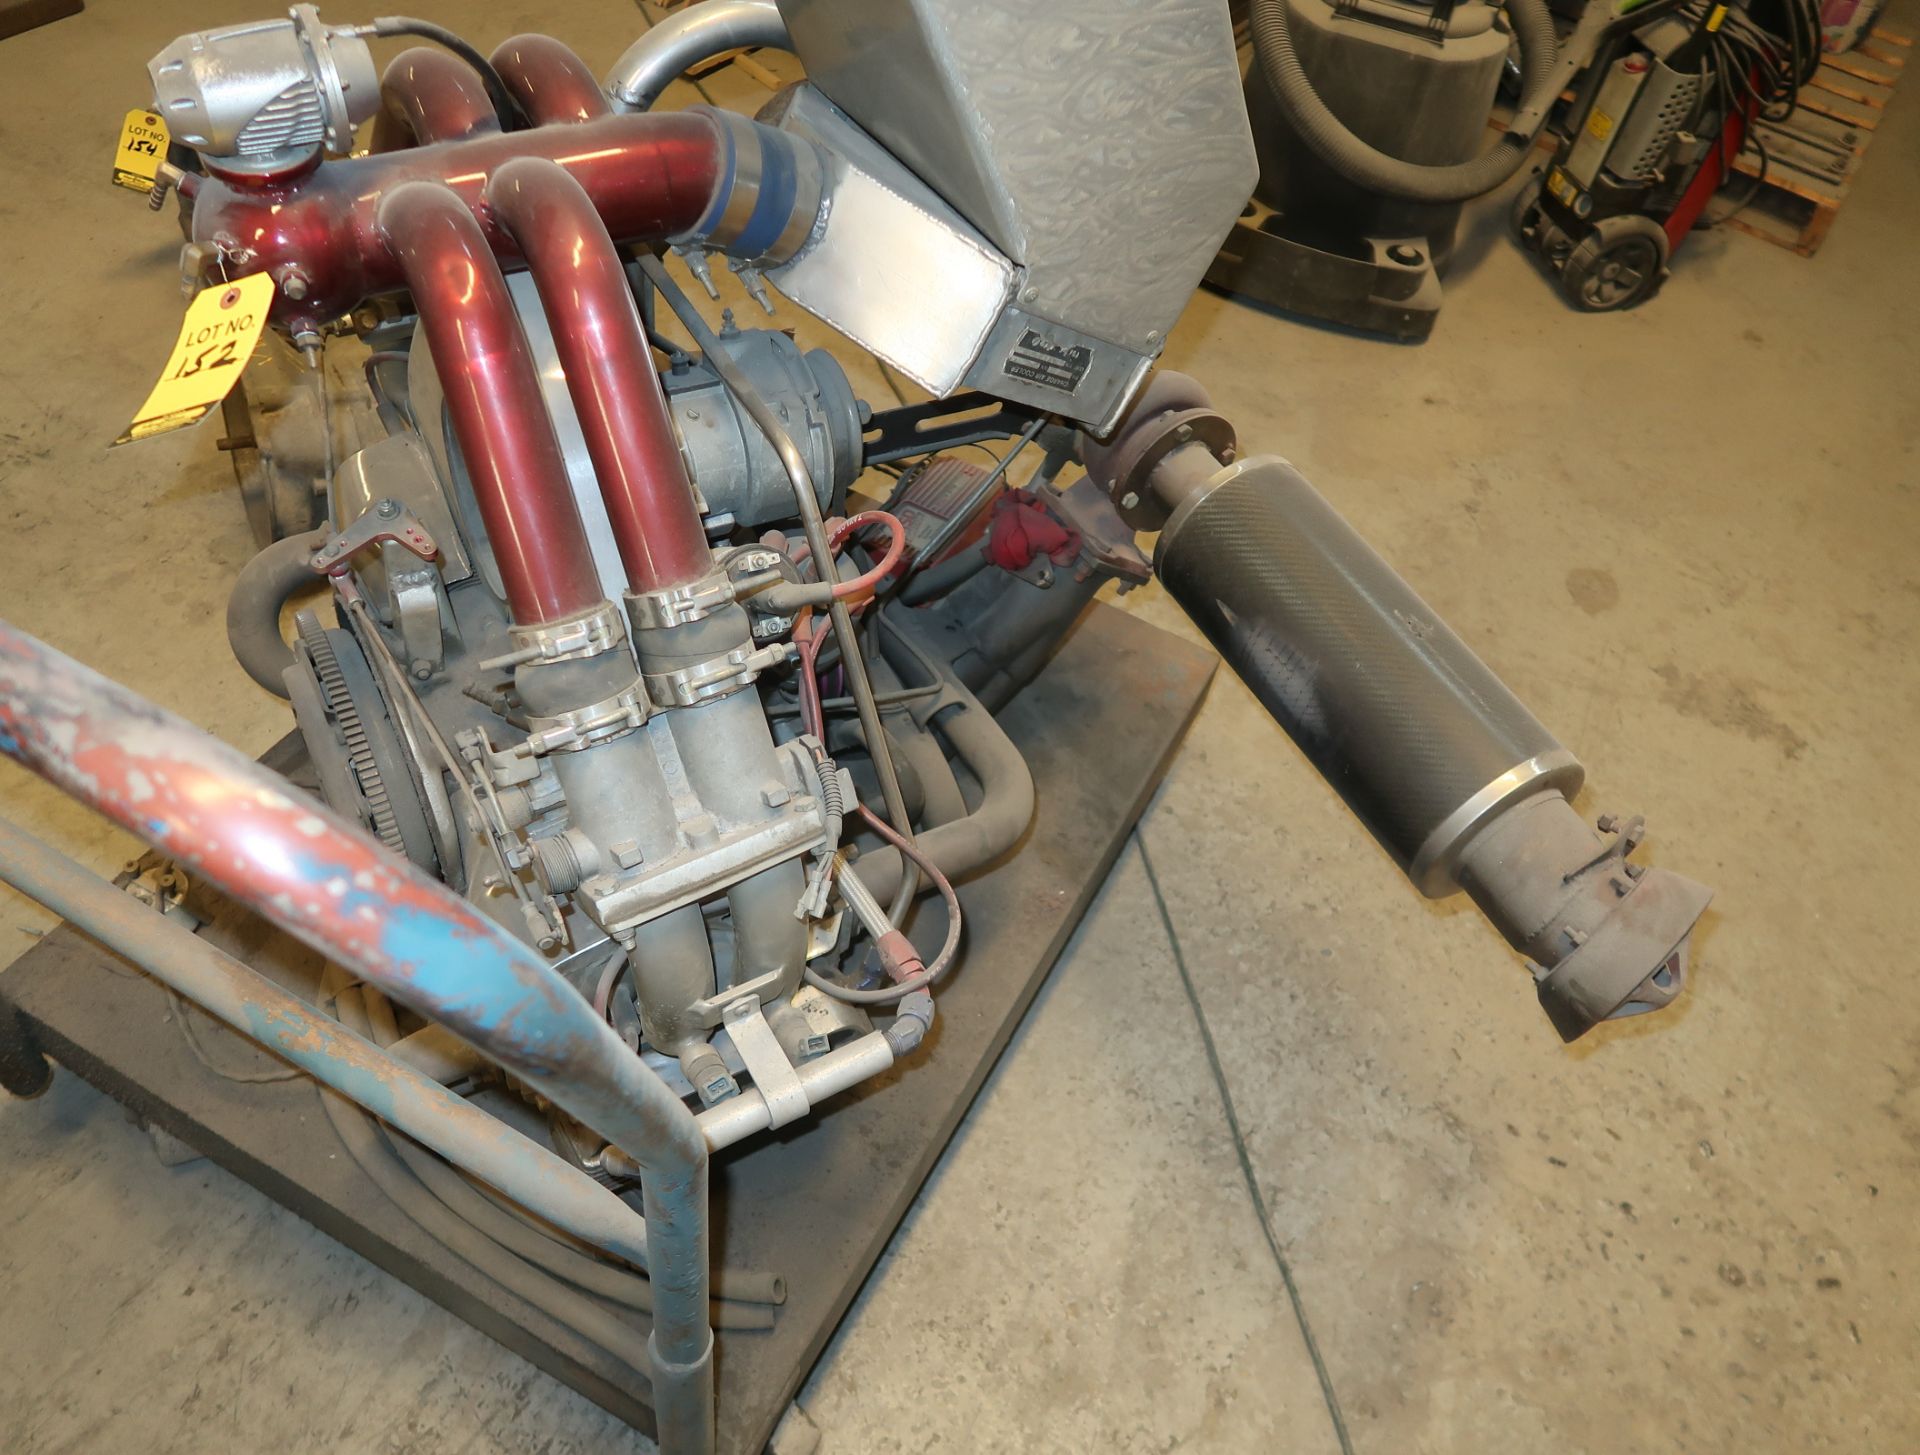 VW 78 X 94, NEW CASE, FUEL INJECTED, INNER COOLED, ROTOMASTER HIGHFLOW TURBO, RATION ROCKERS,